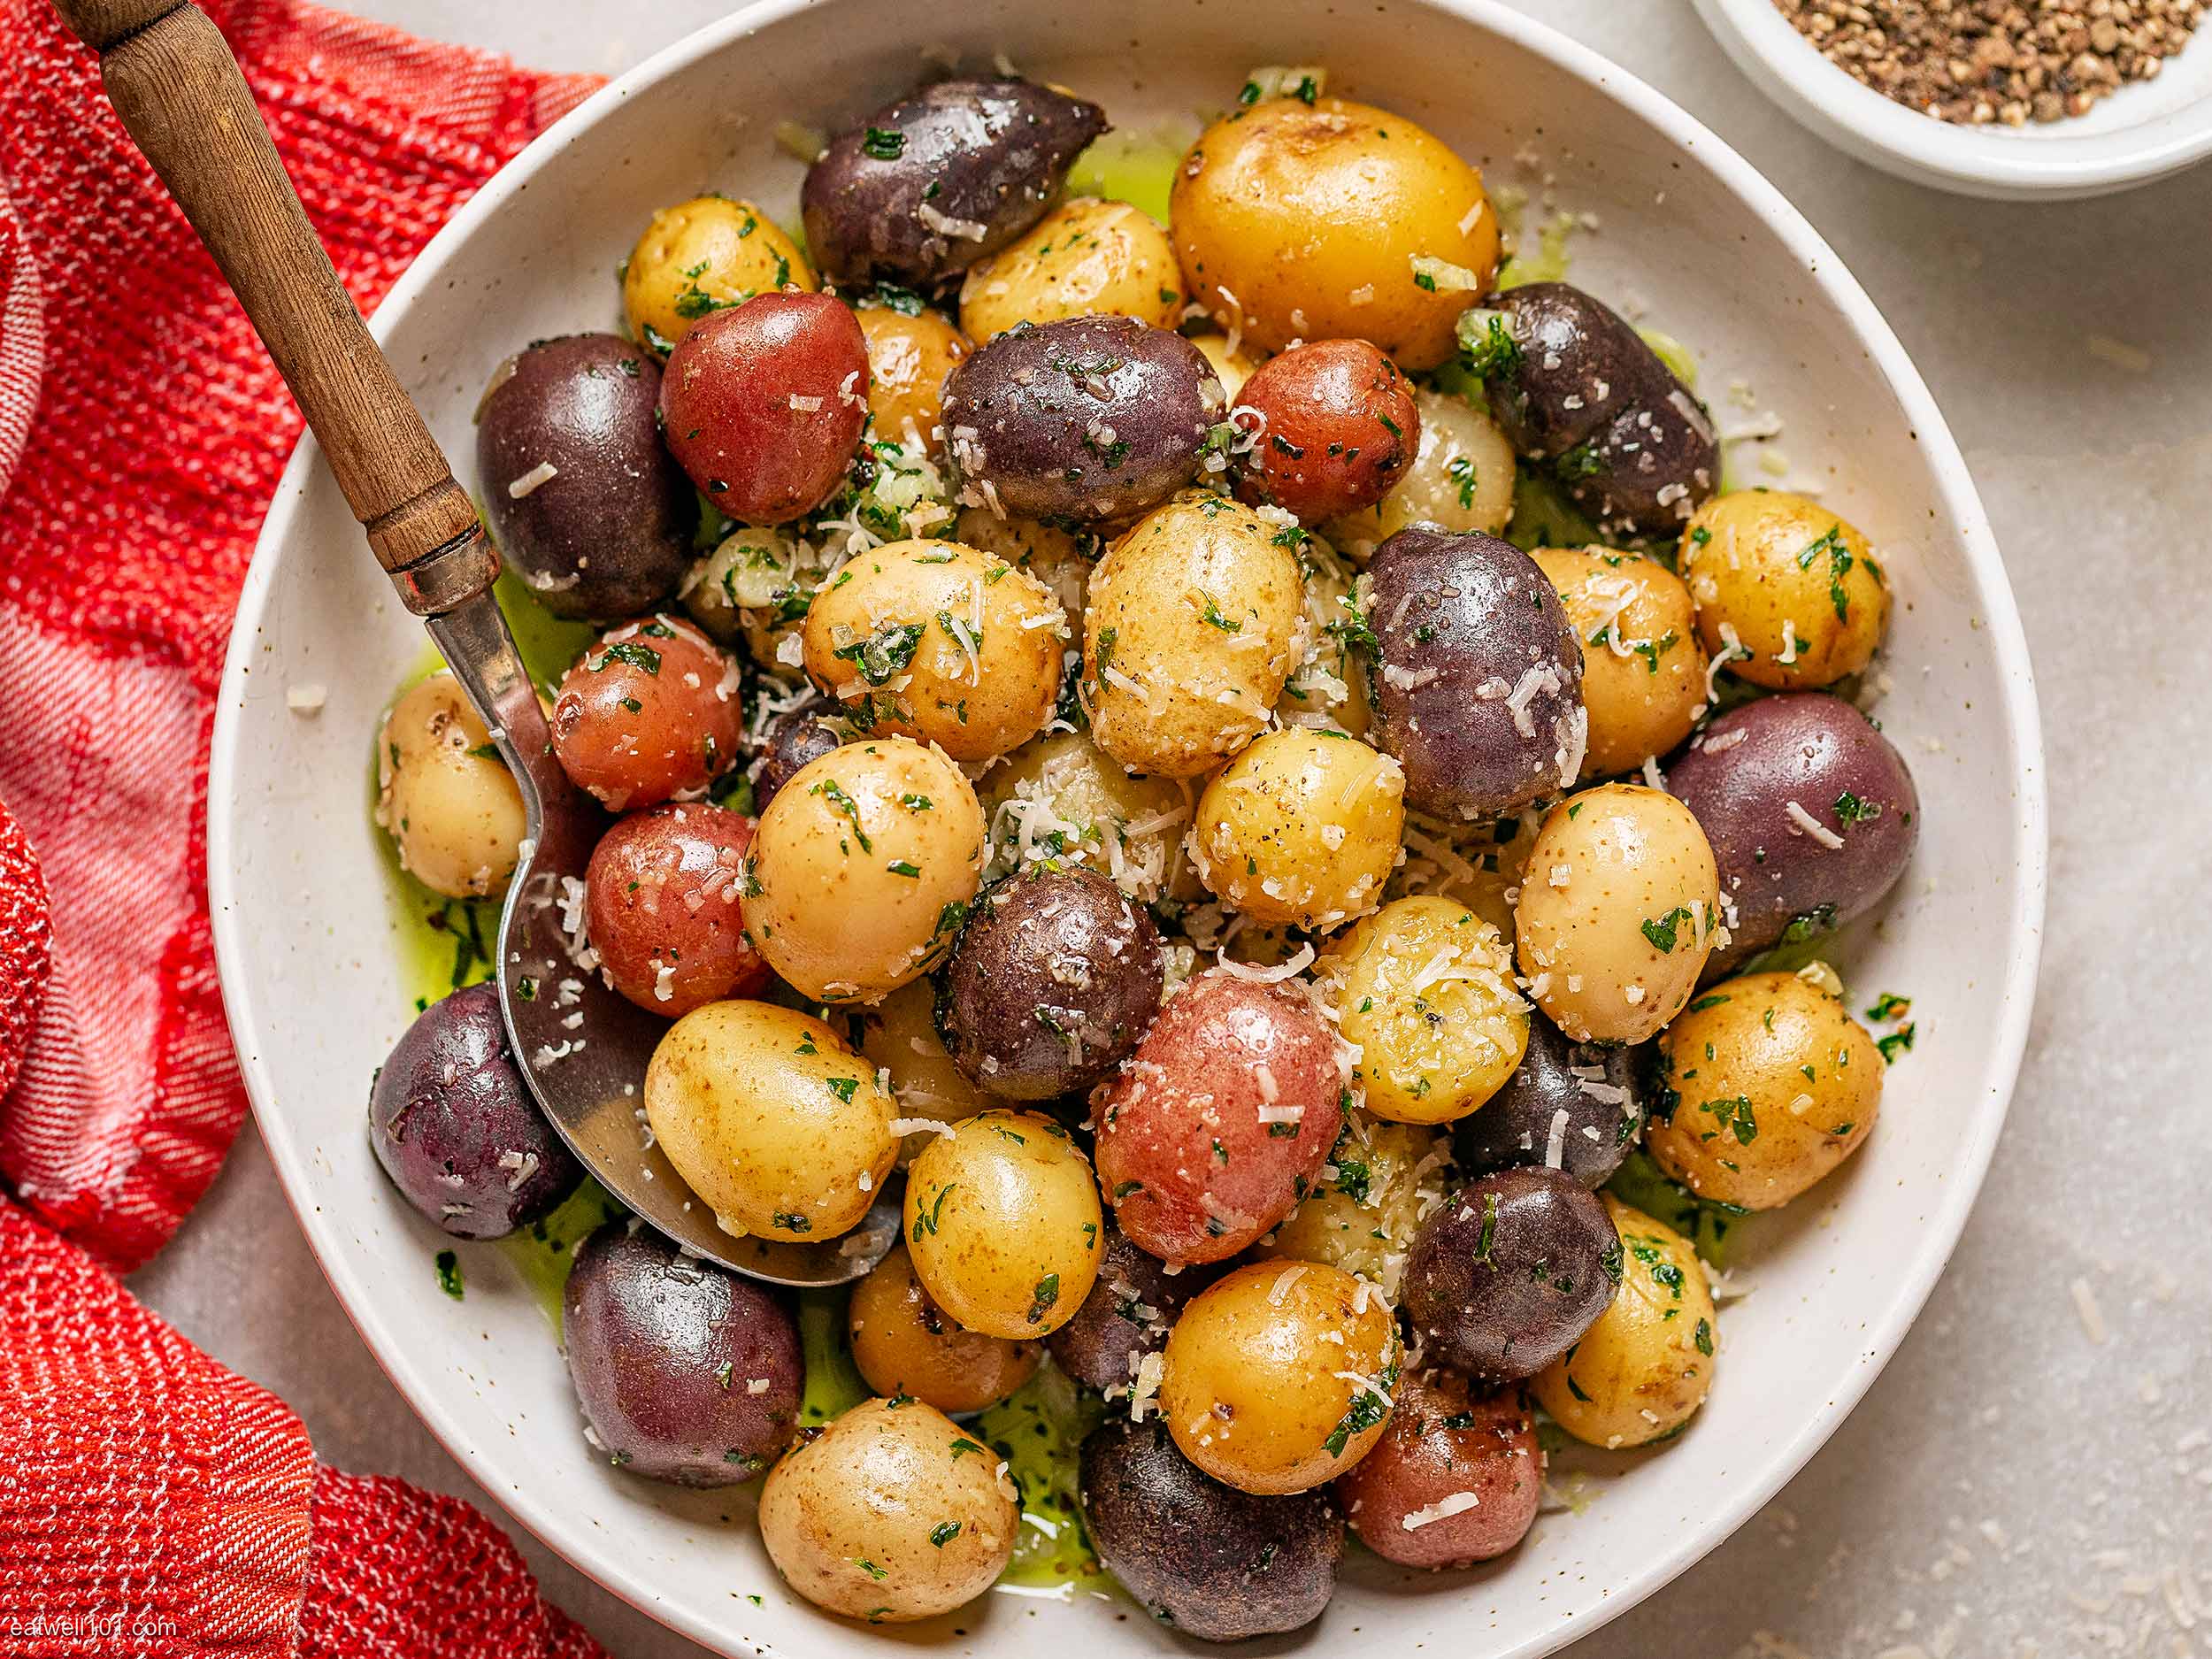 How Long to Boil Baby Potatoes (+ Delicious Recipe!)